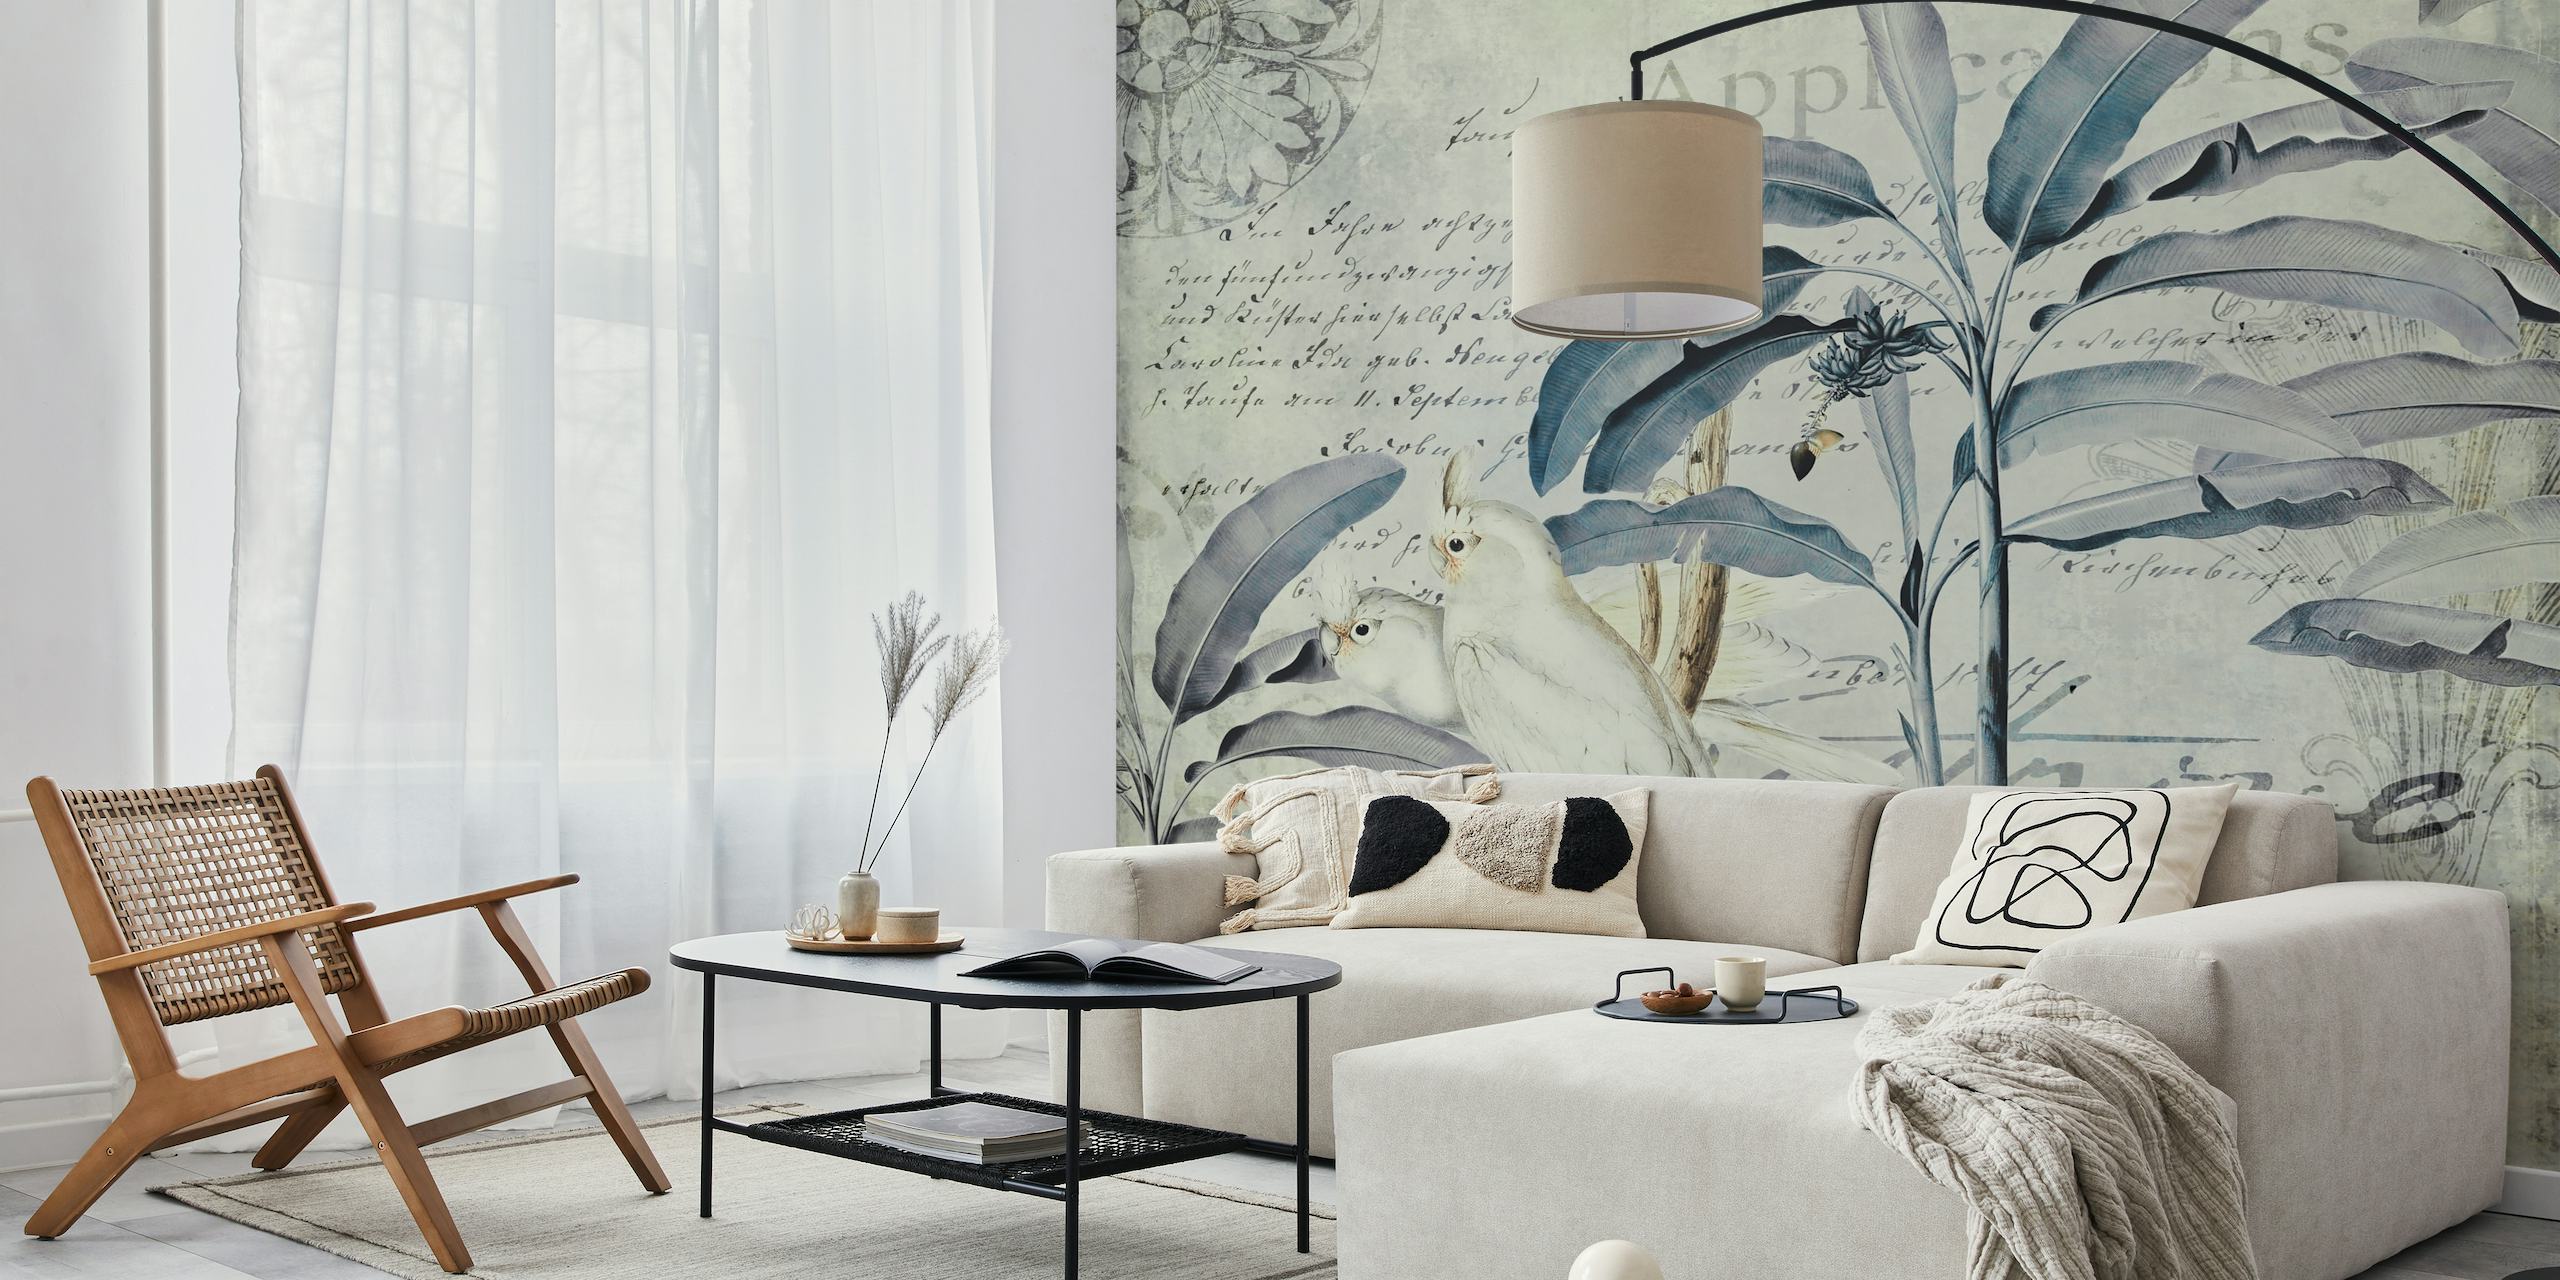 Elegant vintage-style wall mural featuring a cockatoo with botanical motifs and script background.